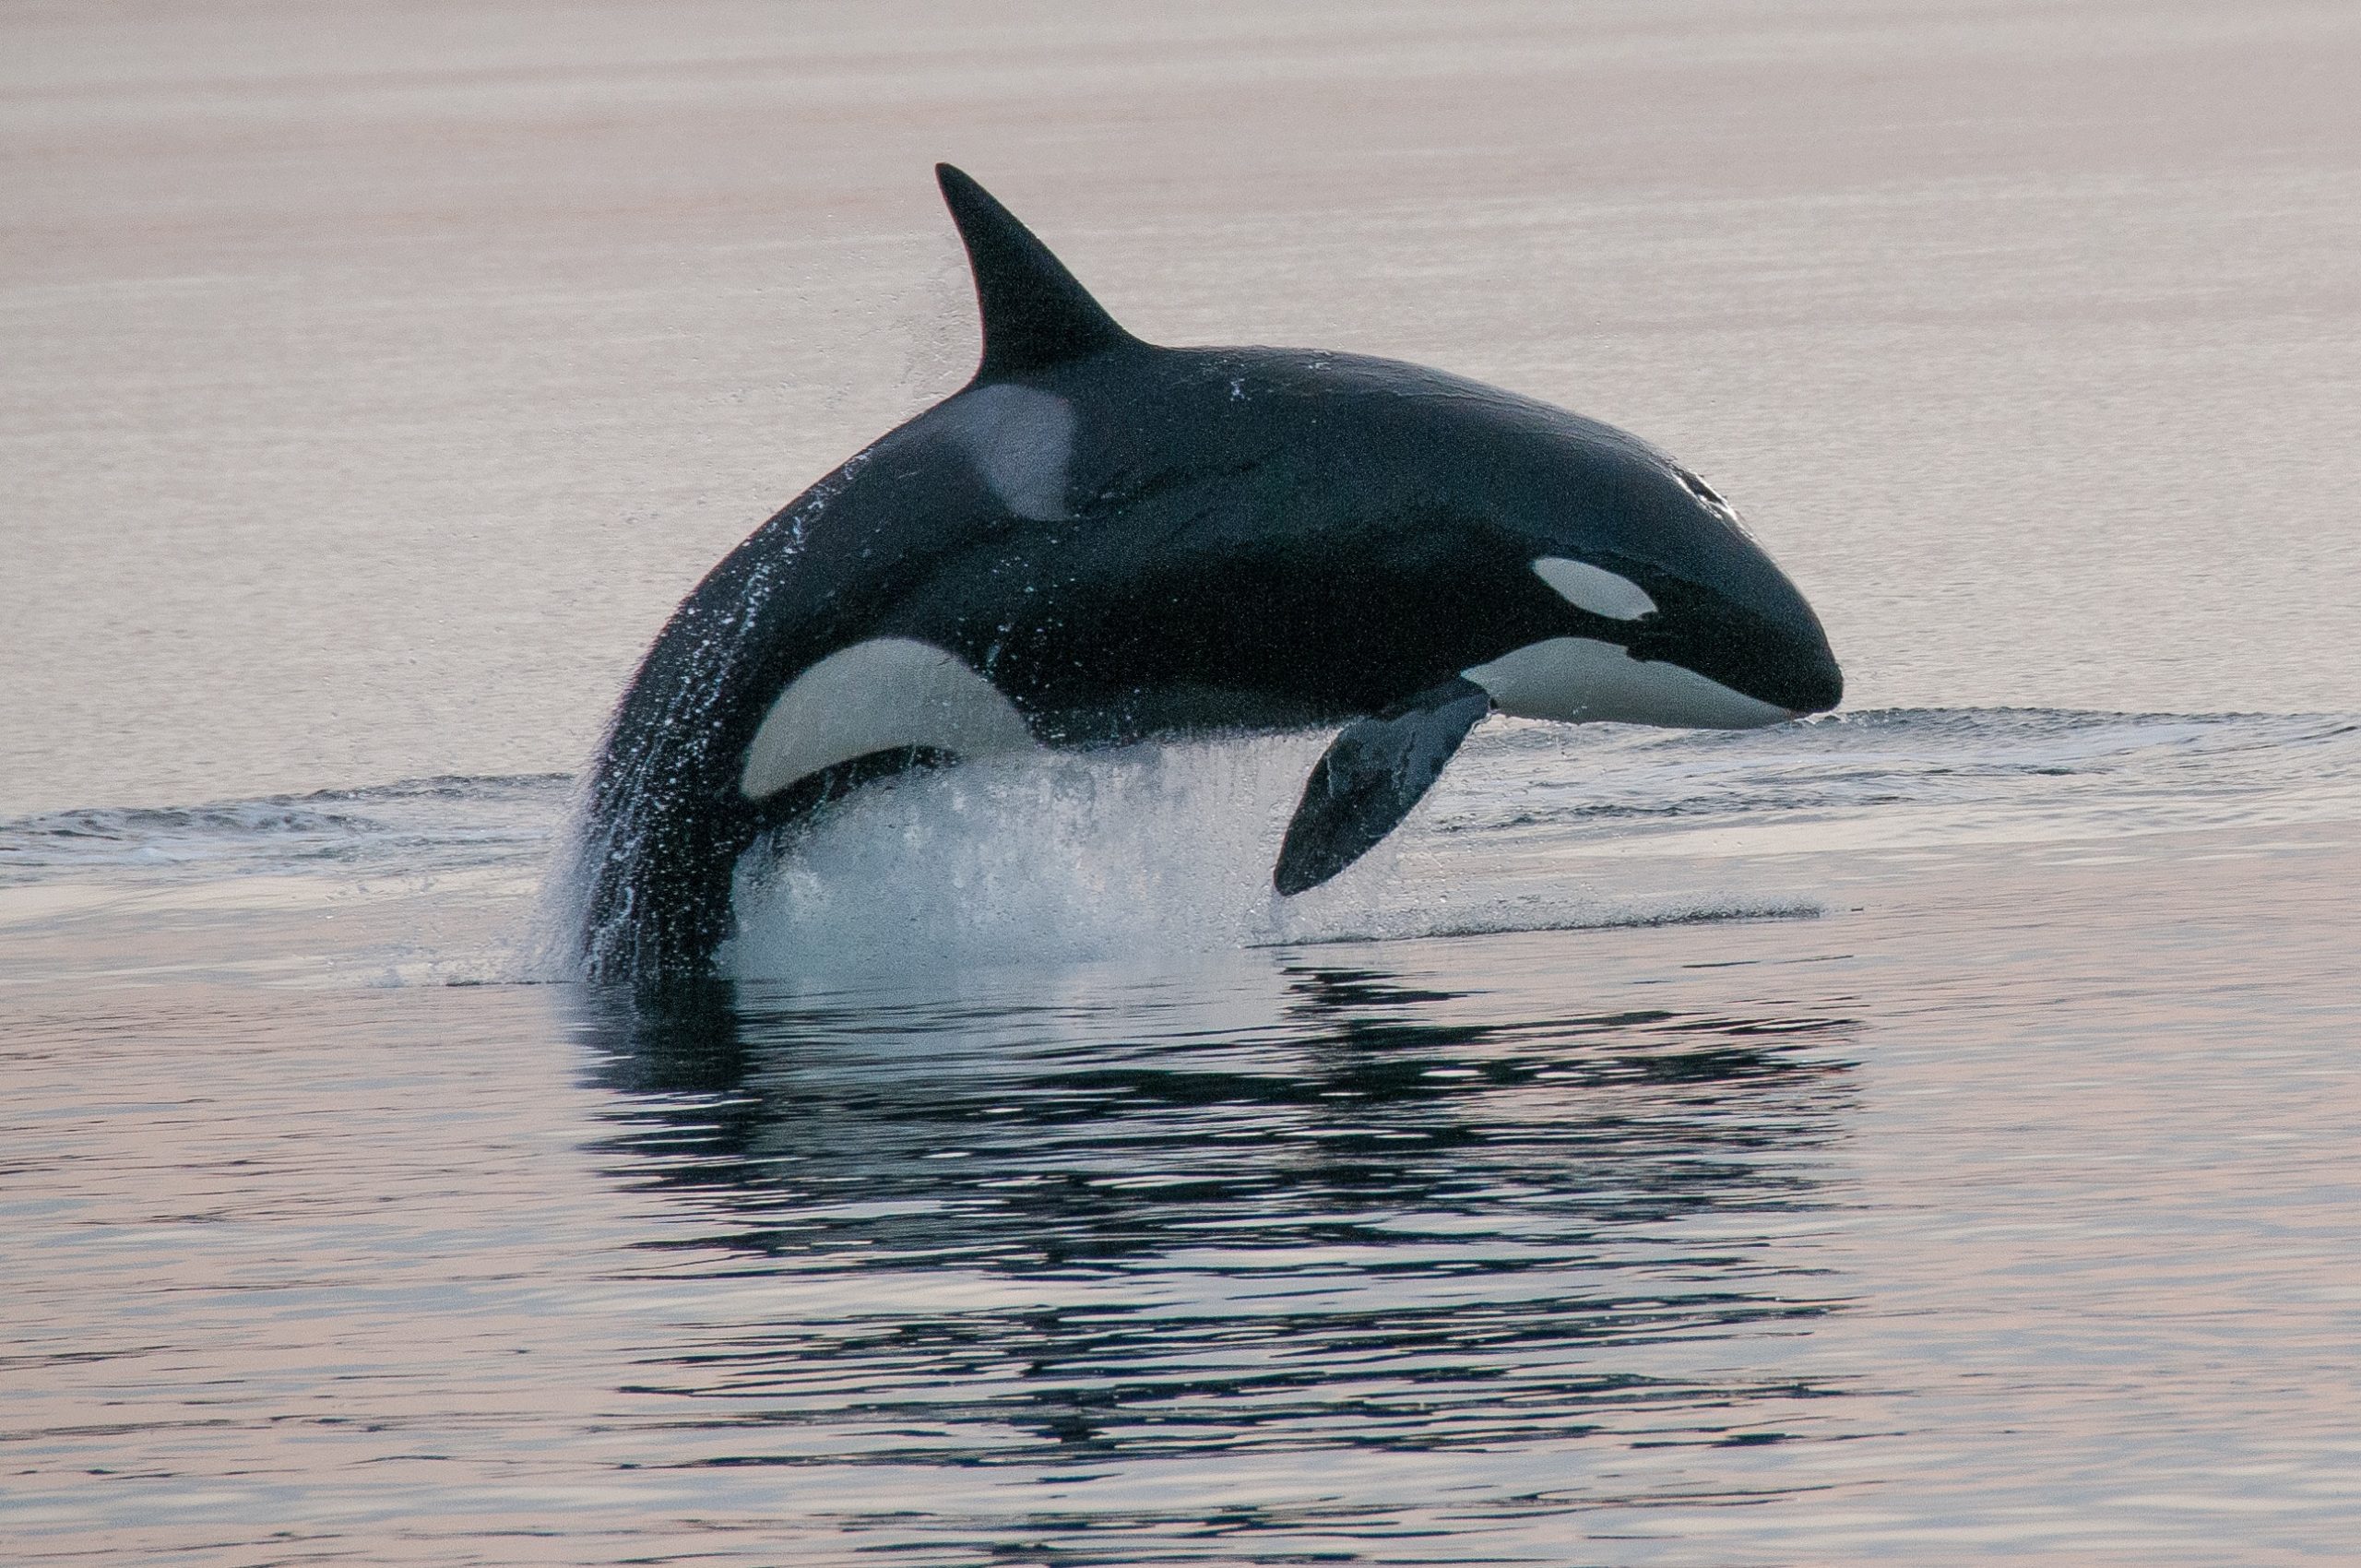 An orca leaping out of the sea